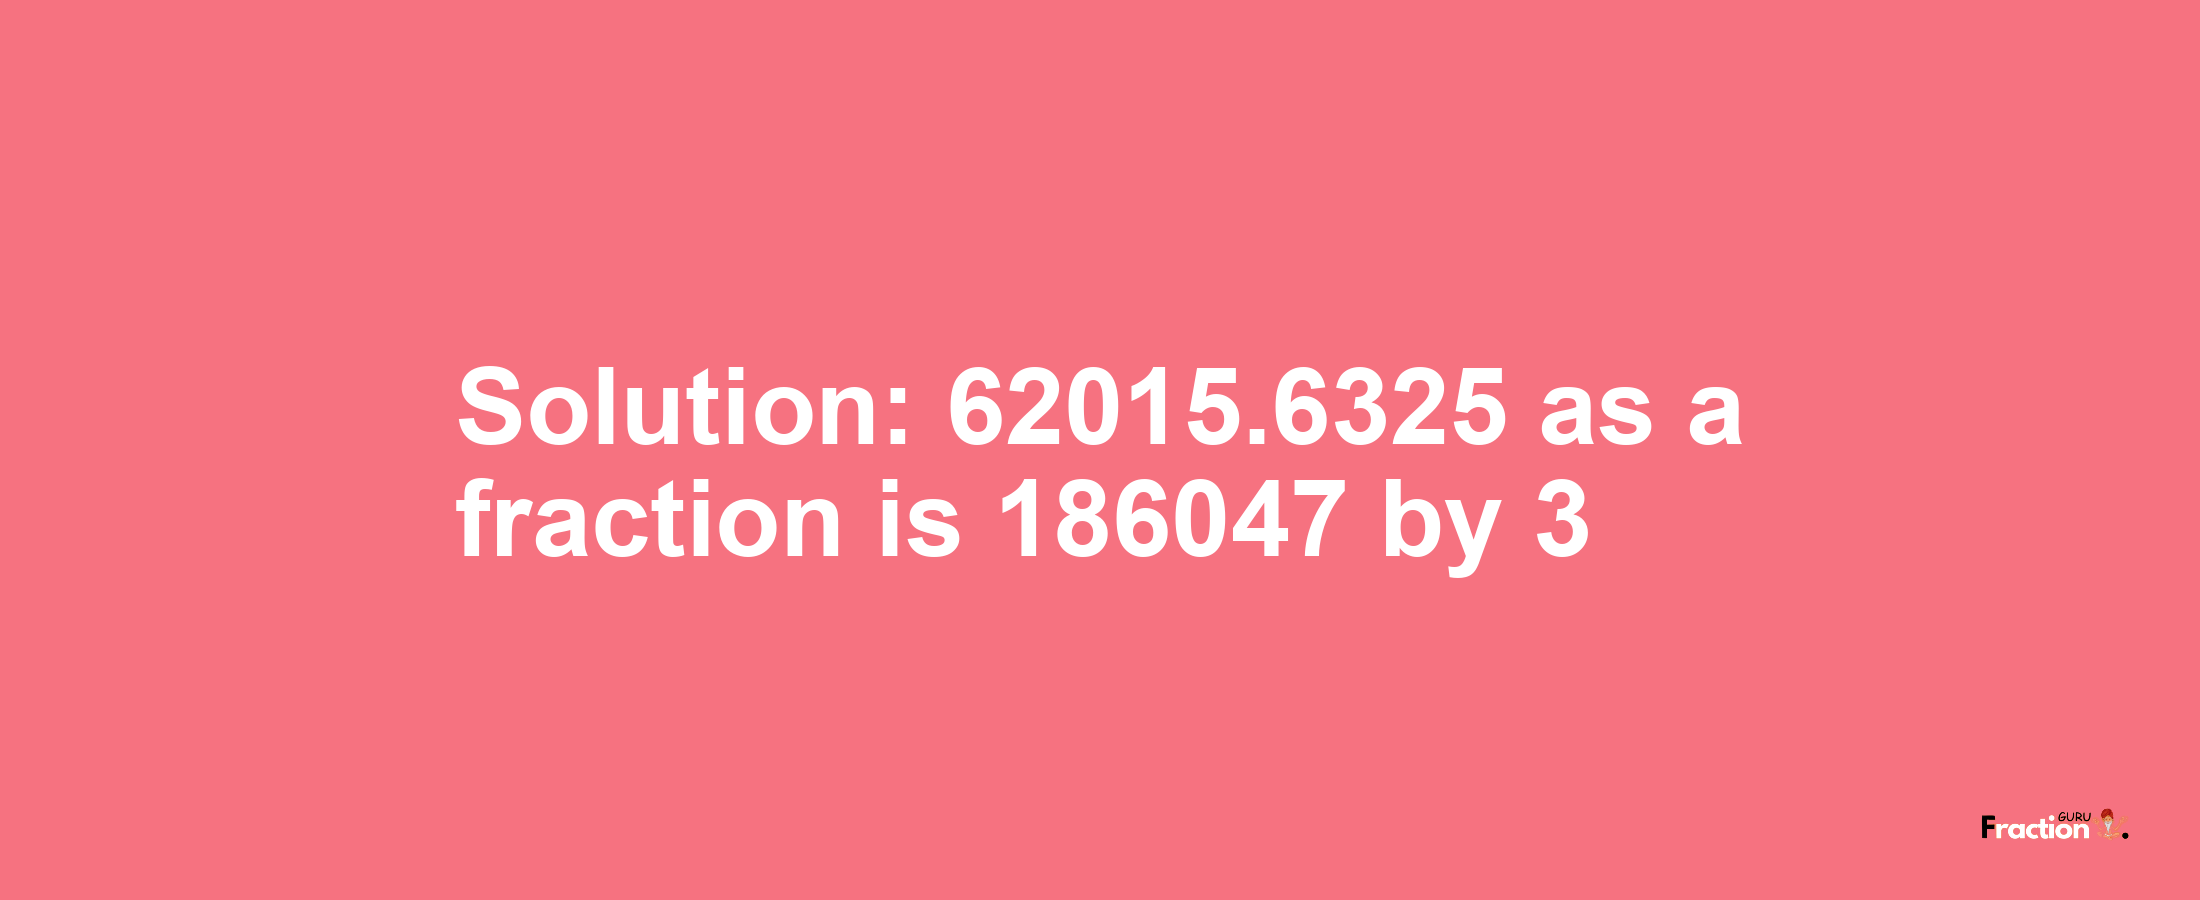 Solution:62015.6325 as a fraction is 186047/3